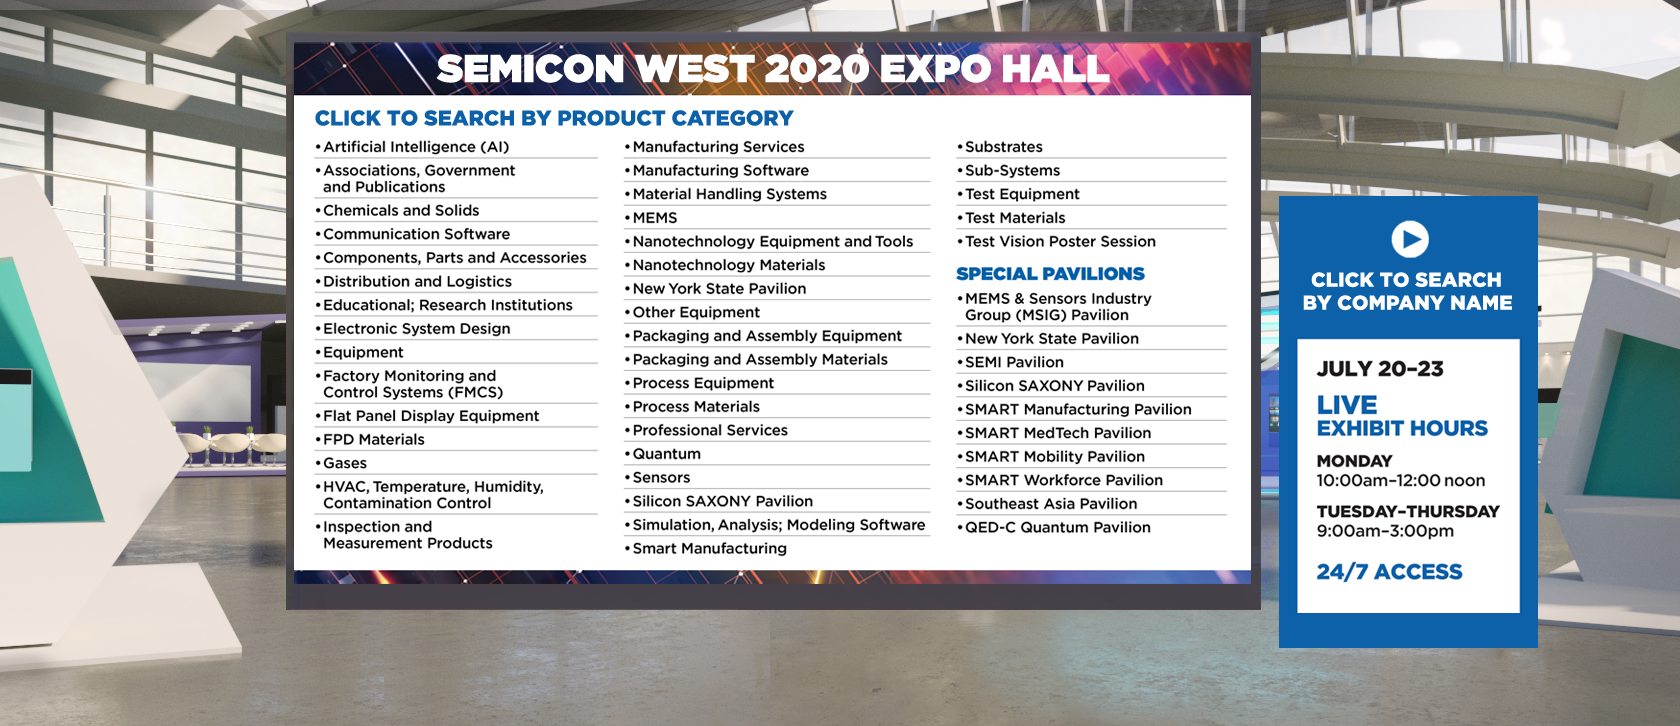 Virtual SEMICON West 2020 Expo Hall Preview